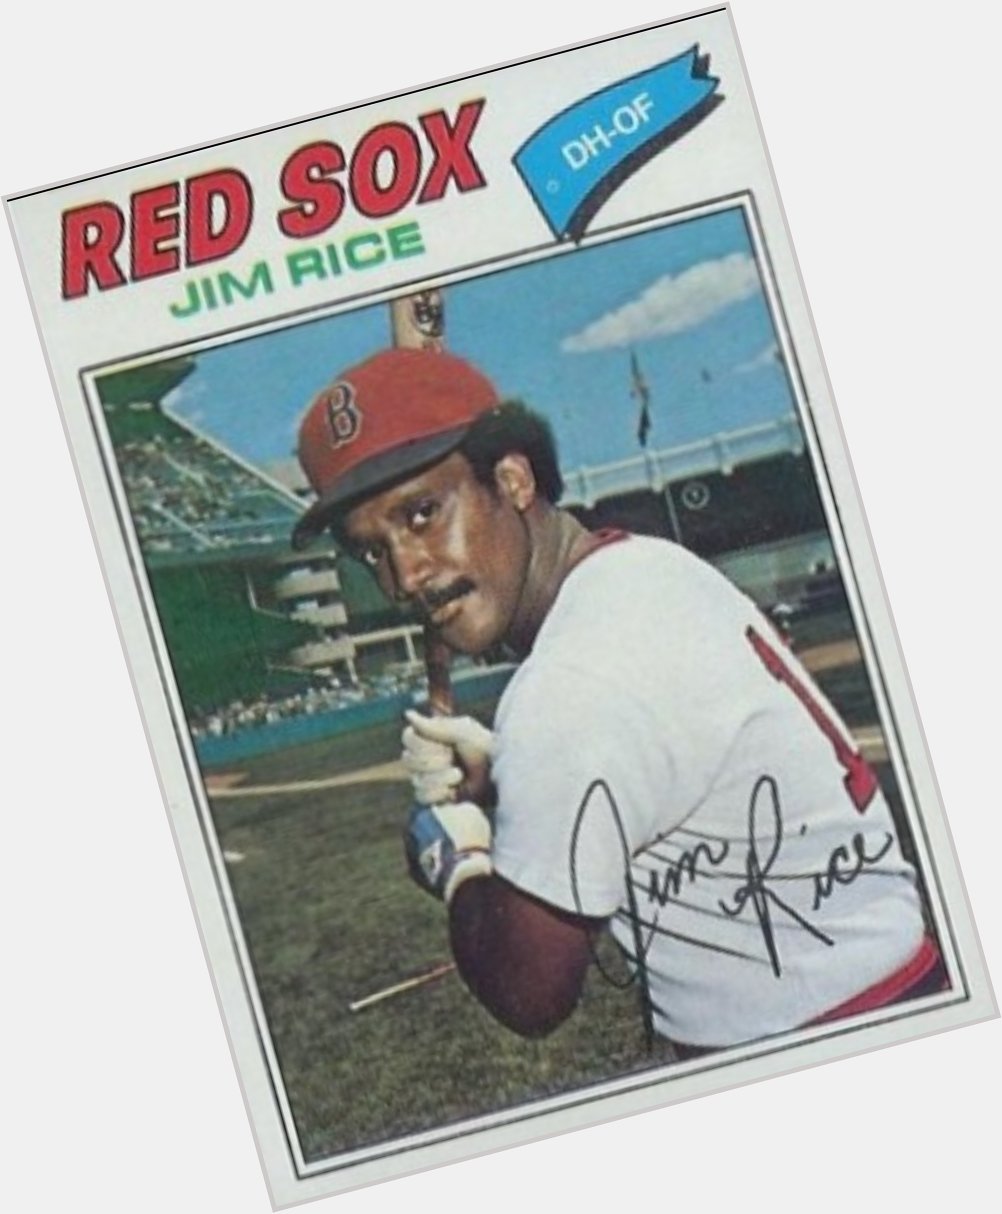 Happy bday to one of my absolute favorite players growing up, Jim Rice.    . Here are my favorite Rice cards. 